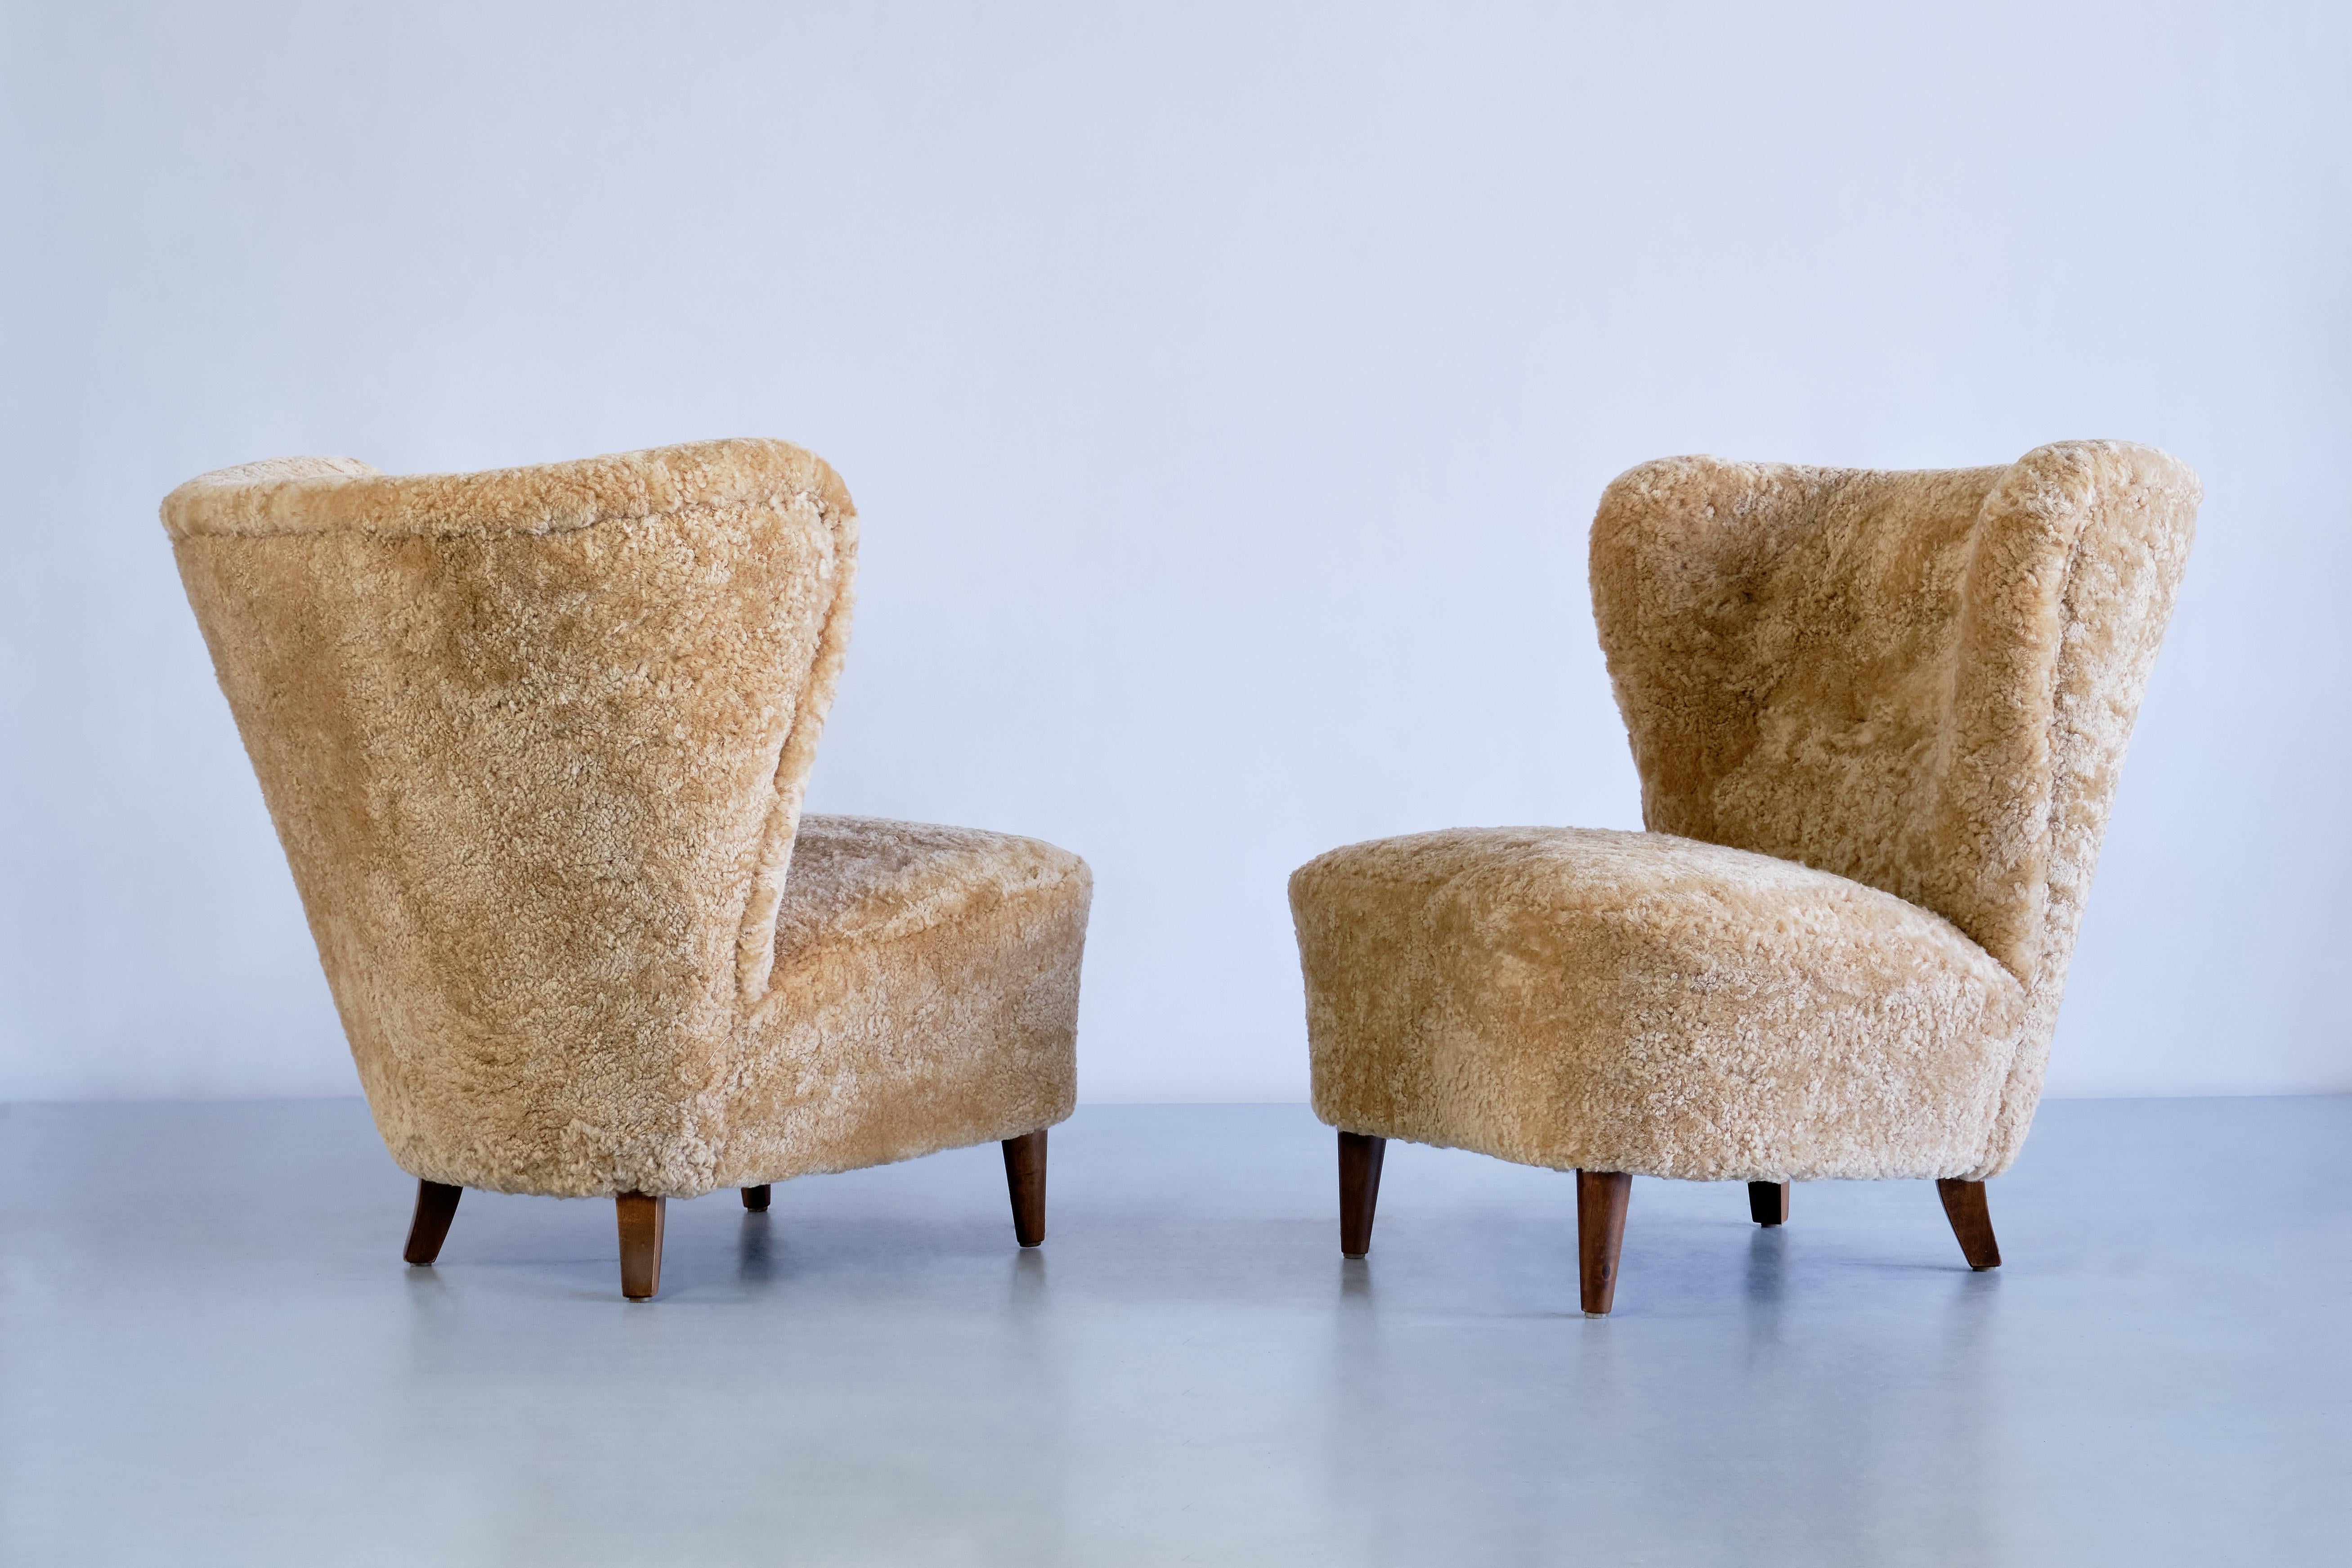 Scandinavian Modern Pair of Johannes Brynte Lounge Chairs in Sheepskin and Ash Wood, Sweden, 1940s For Sale